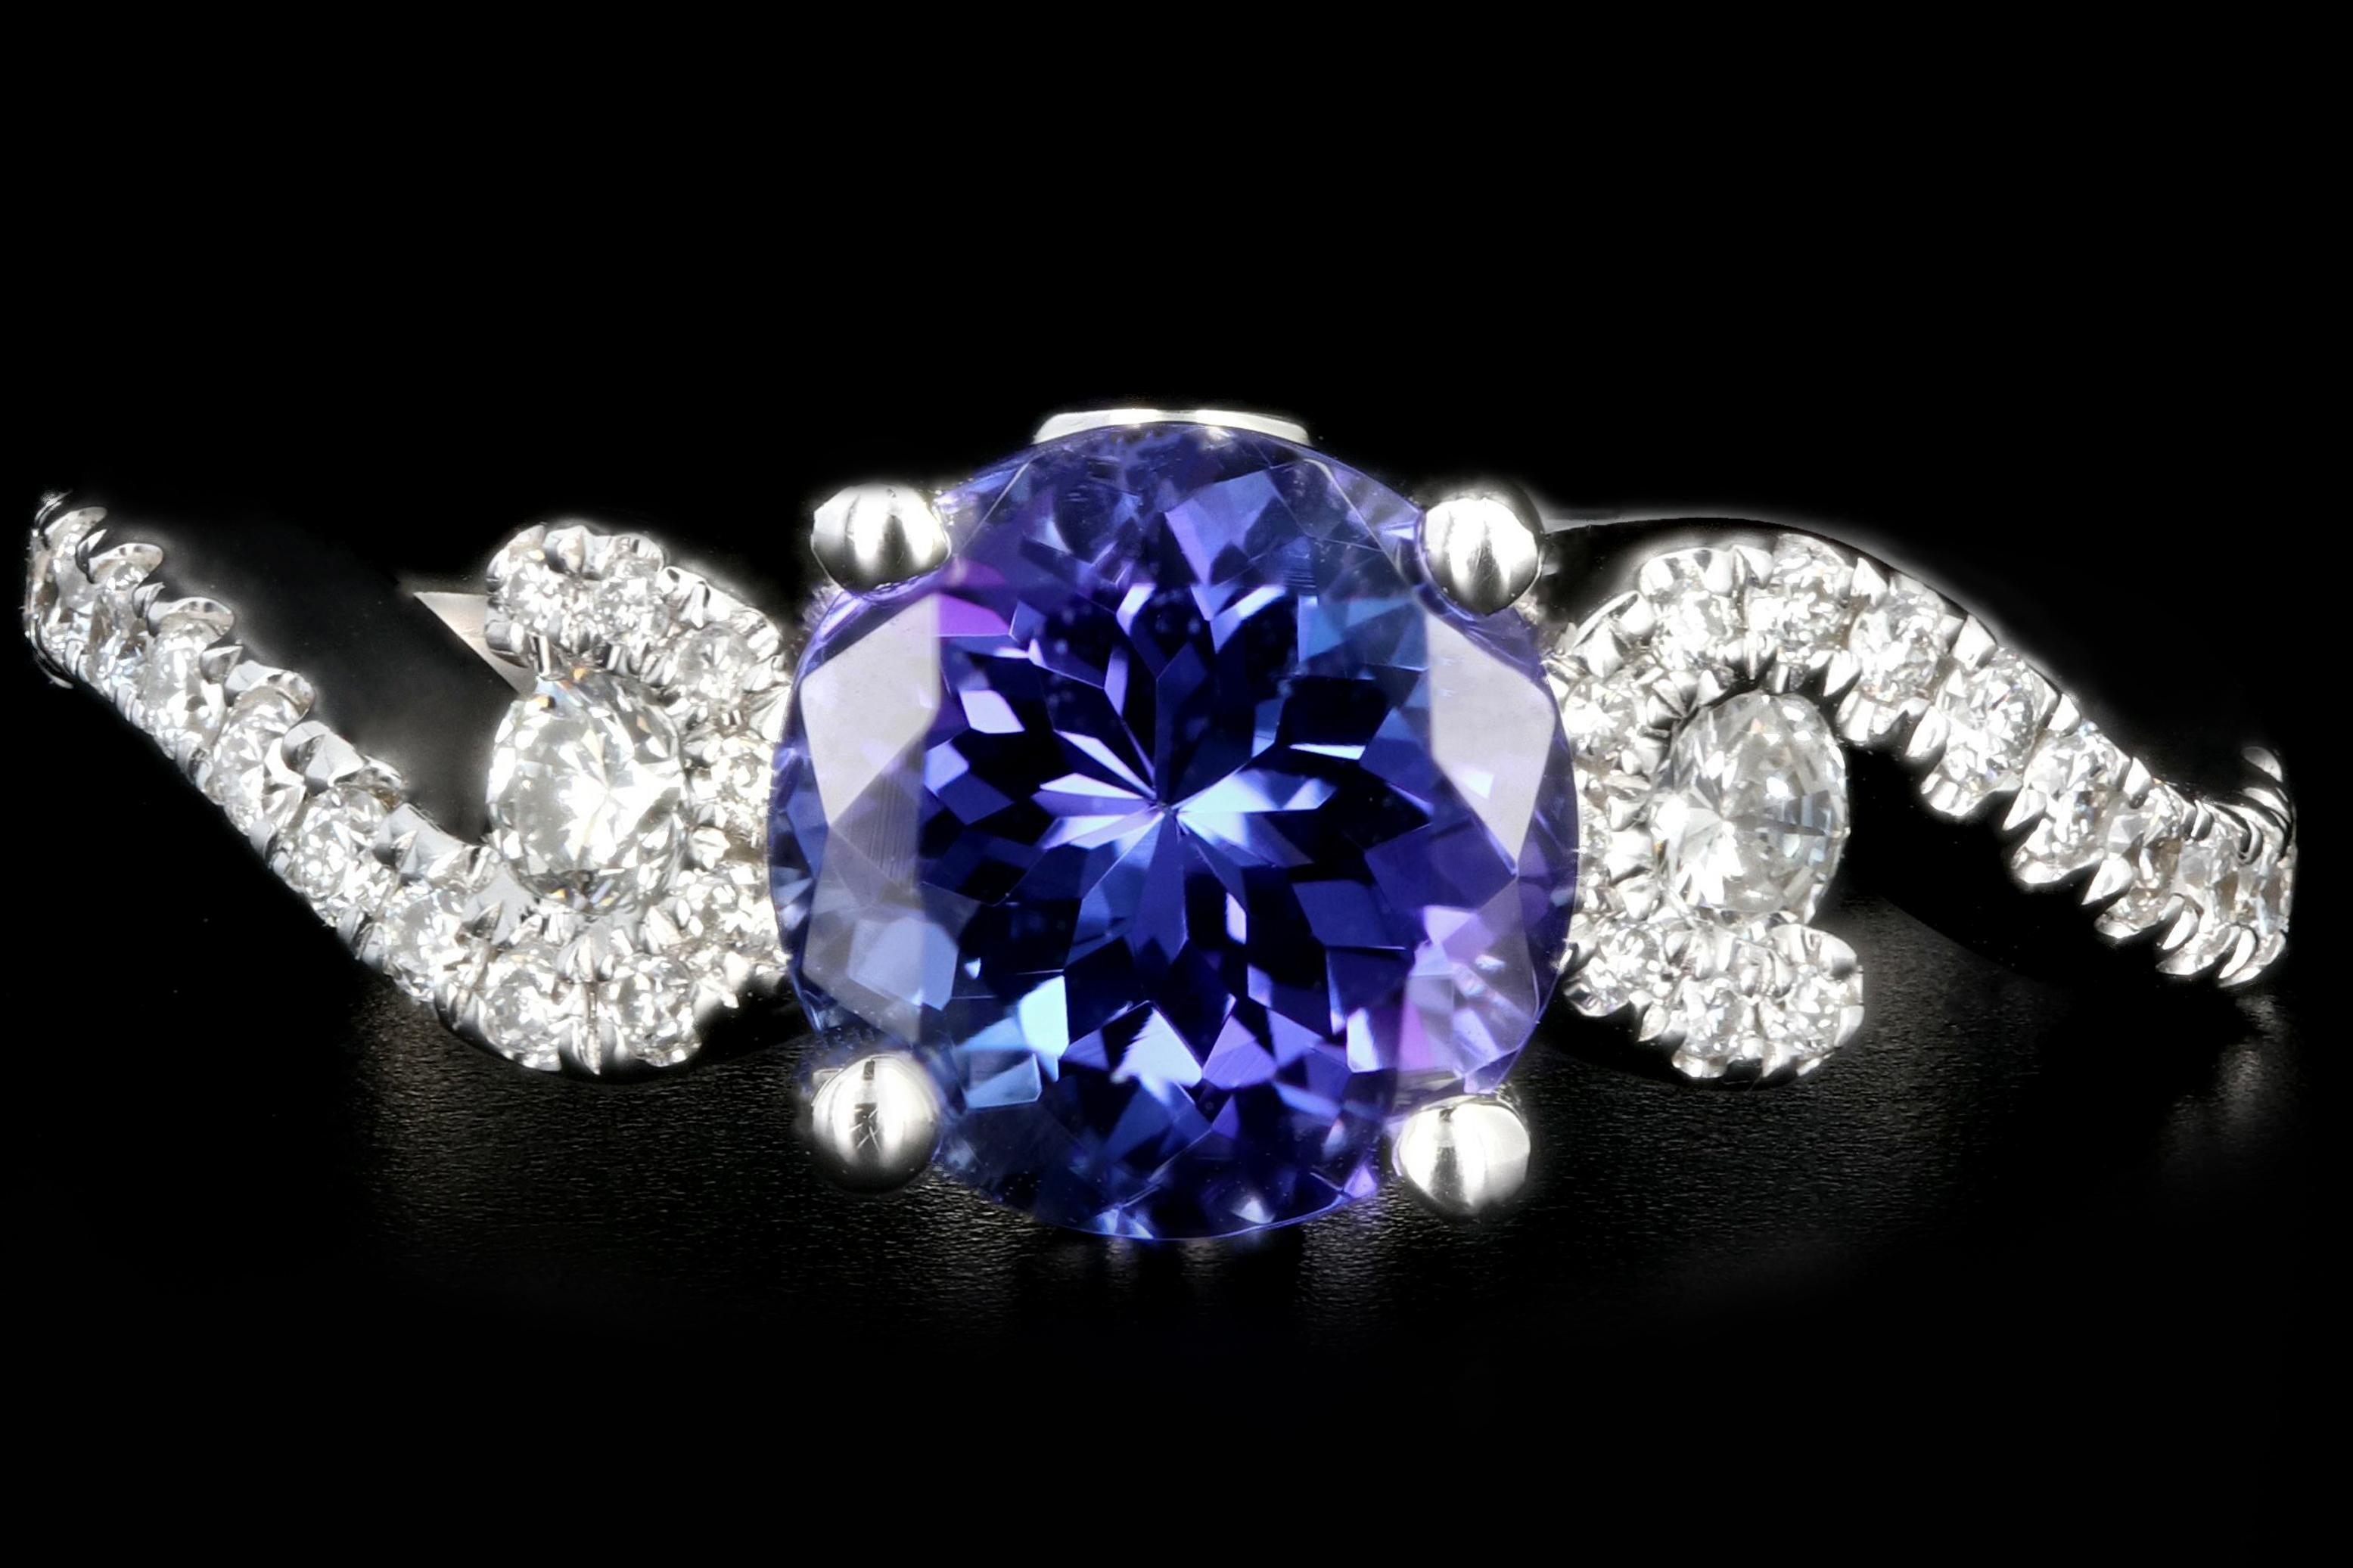 Era: Modern

Composition: 14k White Gold 

Primary Stone: Round Cut Tanzanite

Stone Weight: 1.63CT

Secondary Stone: 34 round brilliant cut diamonds

Stone Weight: .30 CTW

Color: G/H

Clarity: VS1/2

Ring Weight: 3.9 grams

Ring Size: 5.25